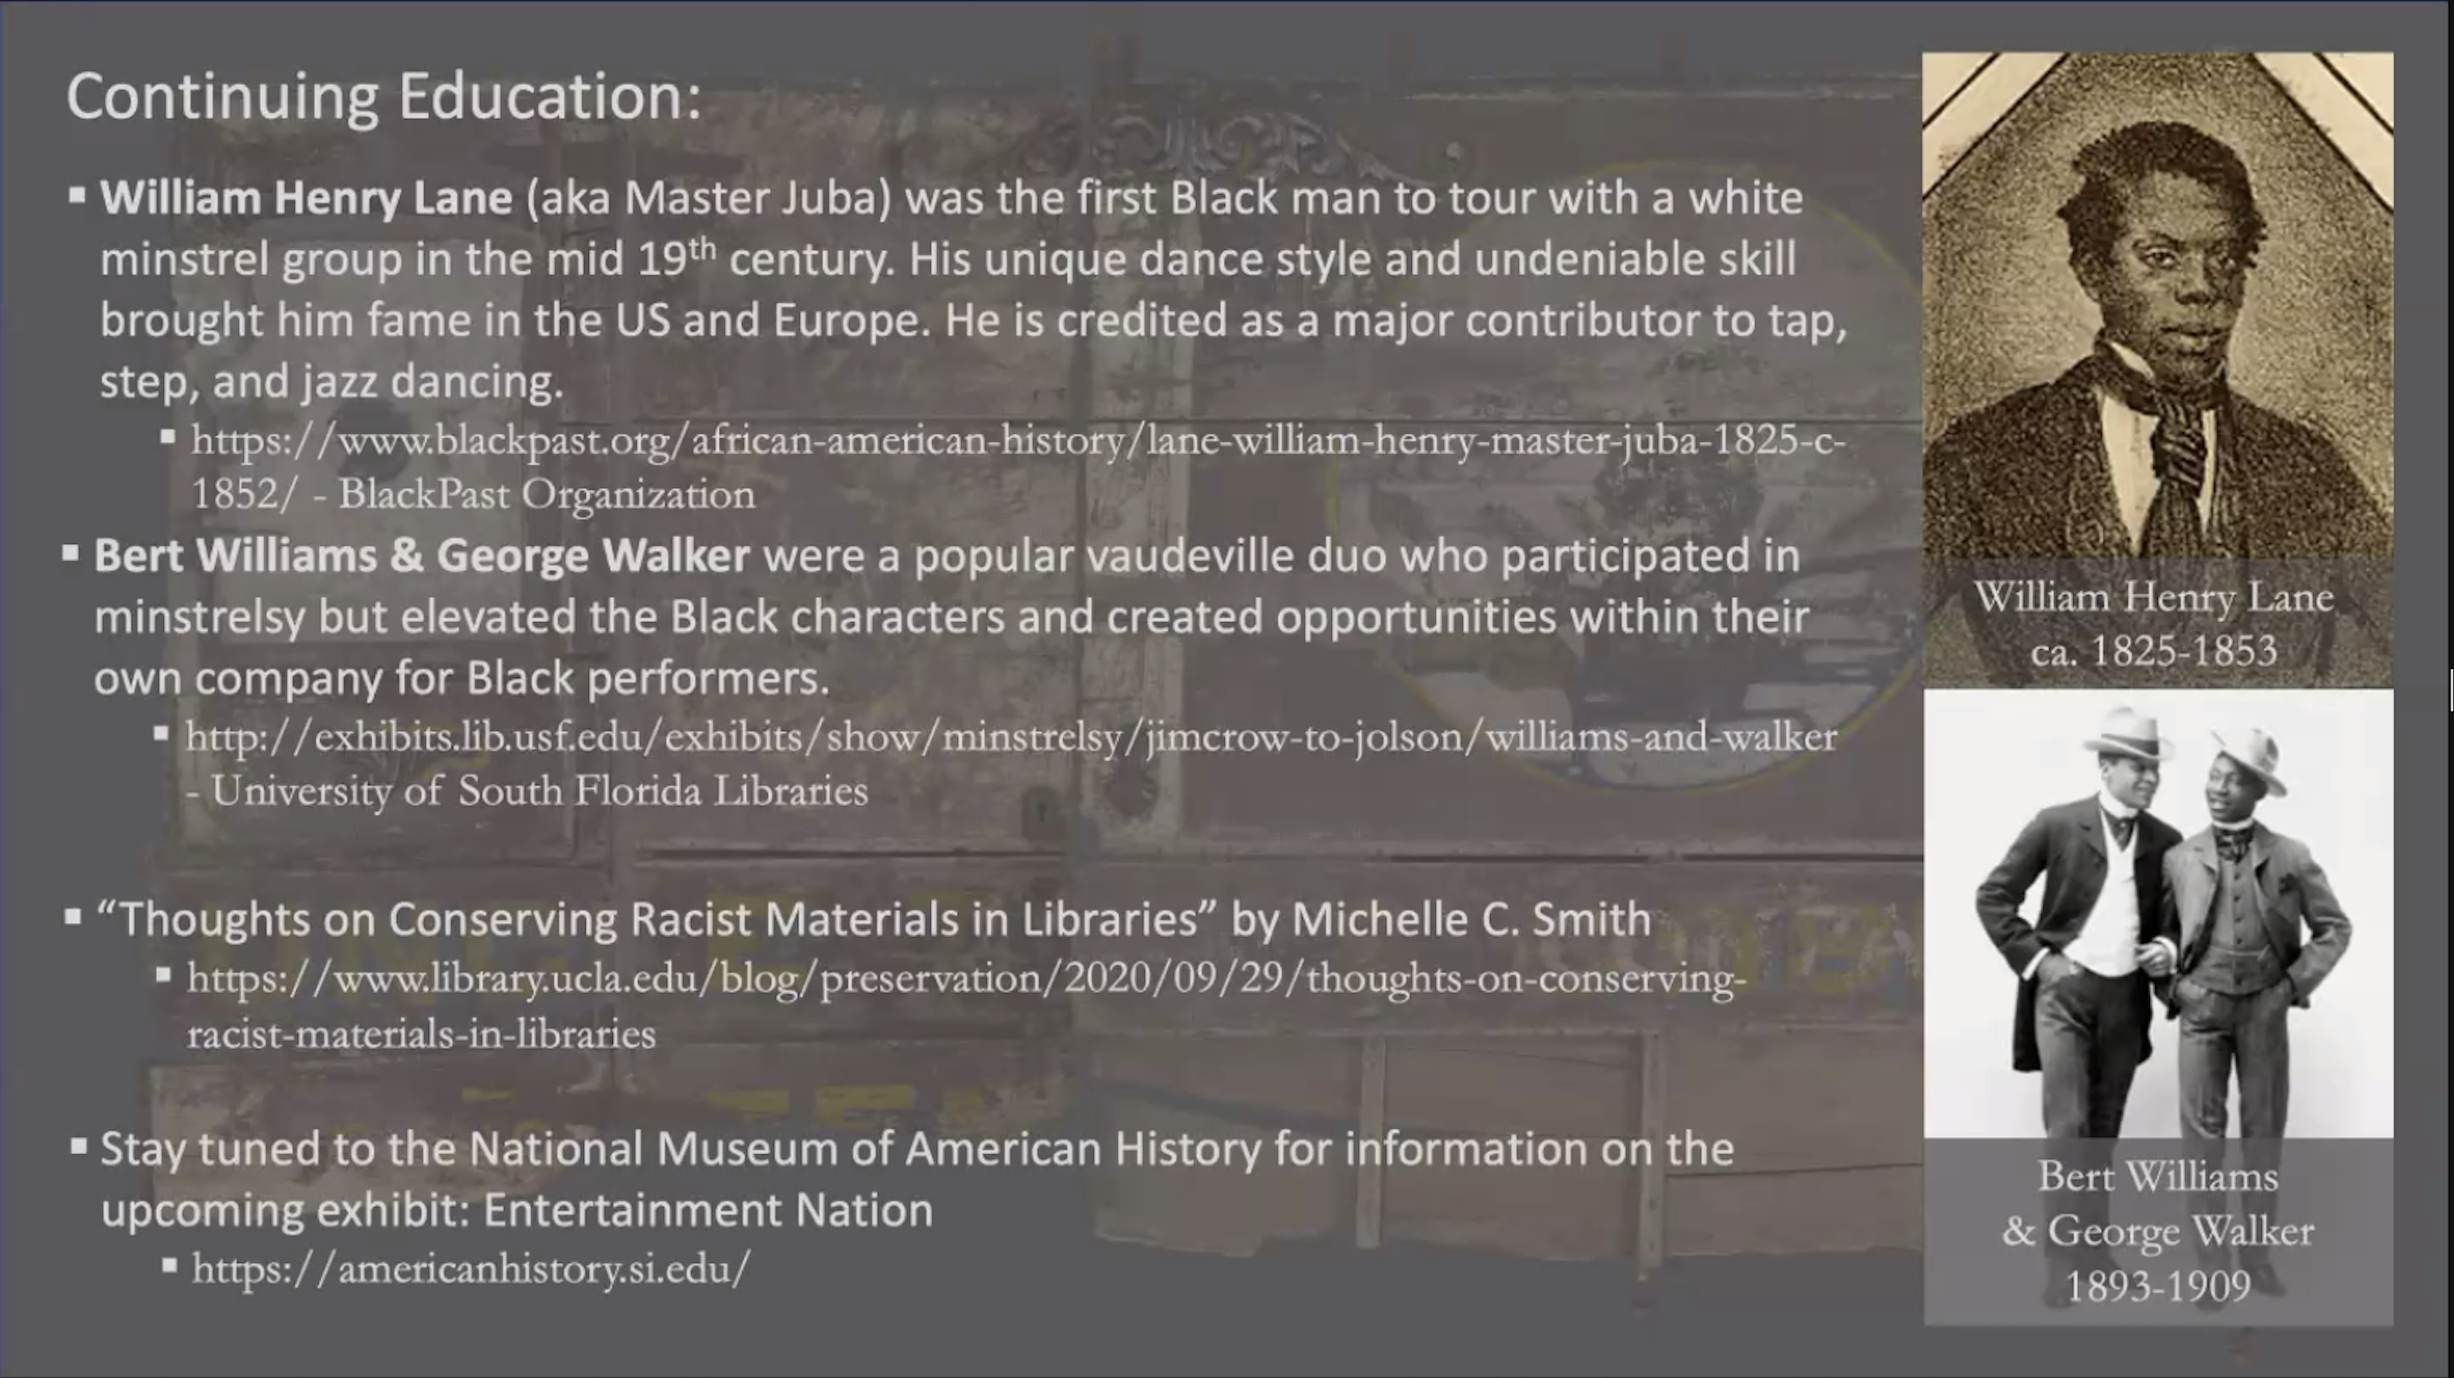 Screenshot from a virtual presentation. Slide titled "Continuing Education" with list of resources listed in meeting summary. Drawing of William Henry Lane ca. 1825-1853 and photograph of Bert Williams and George Walker, 1893-1909.